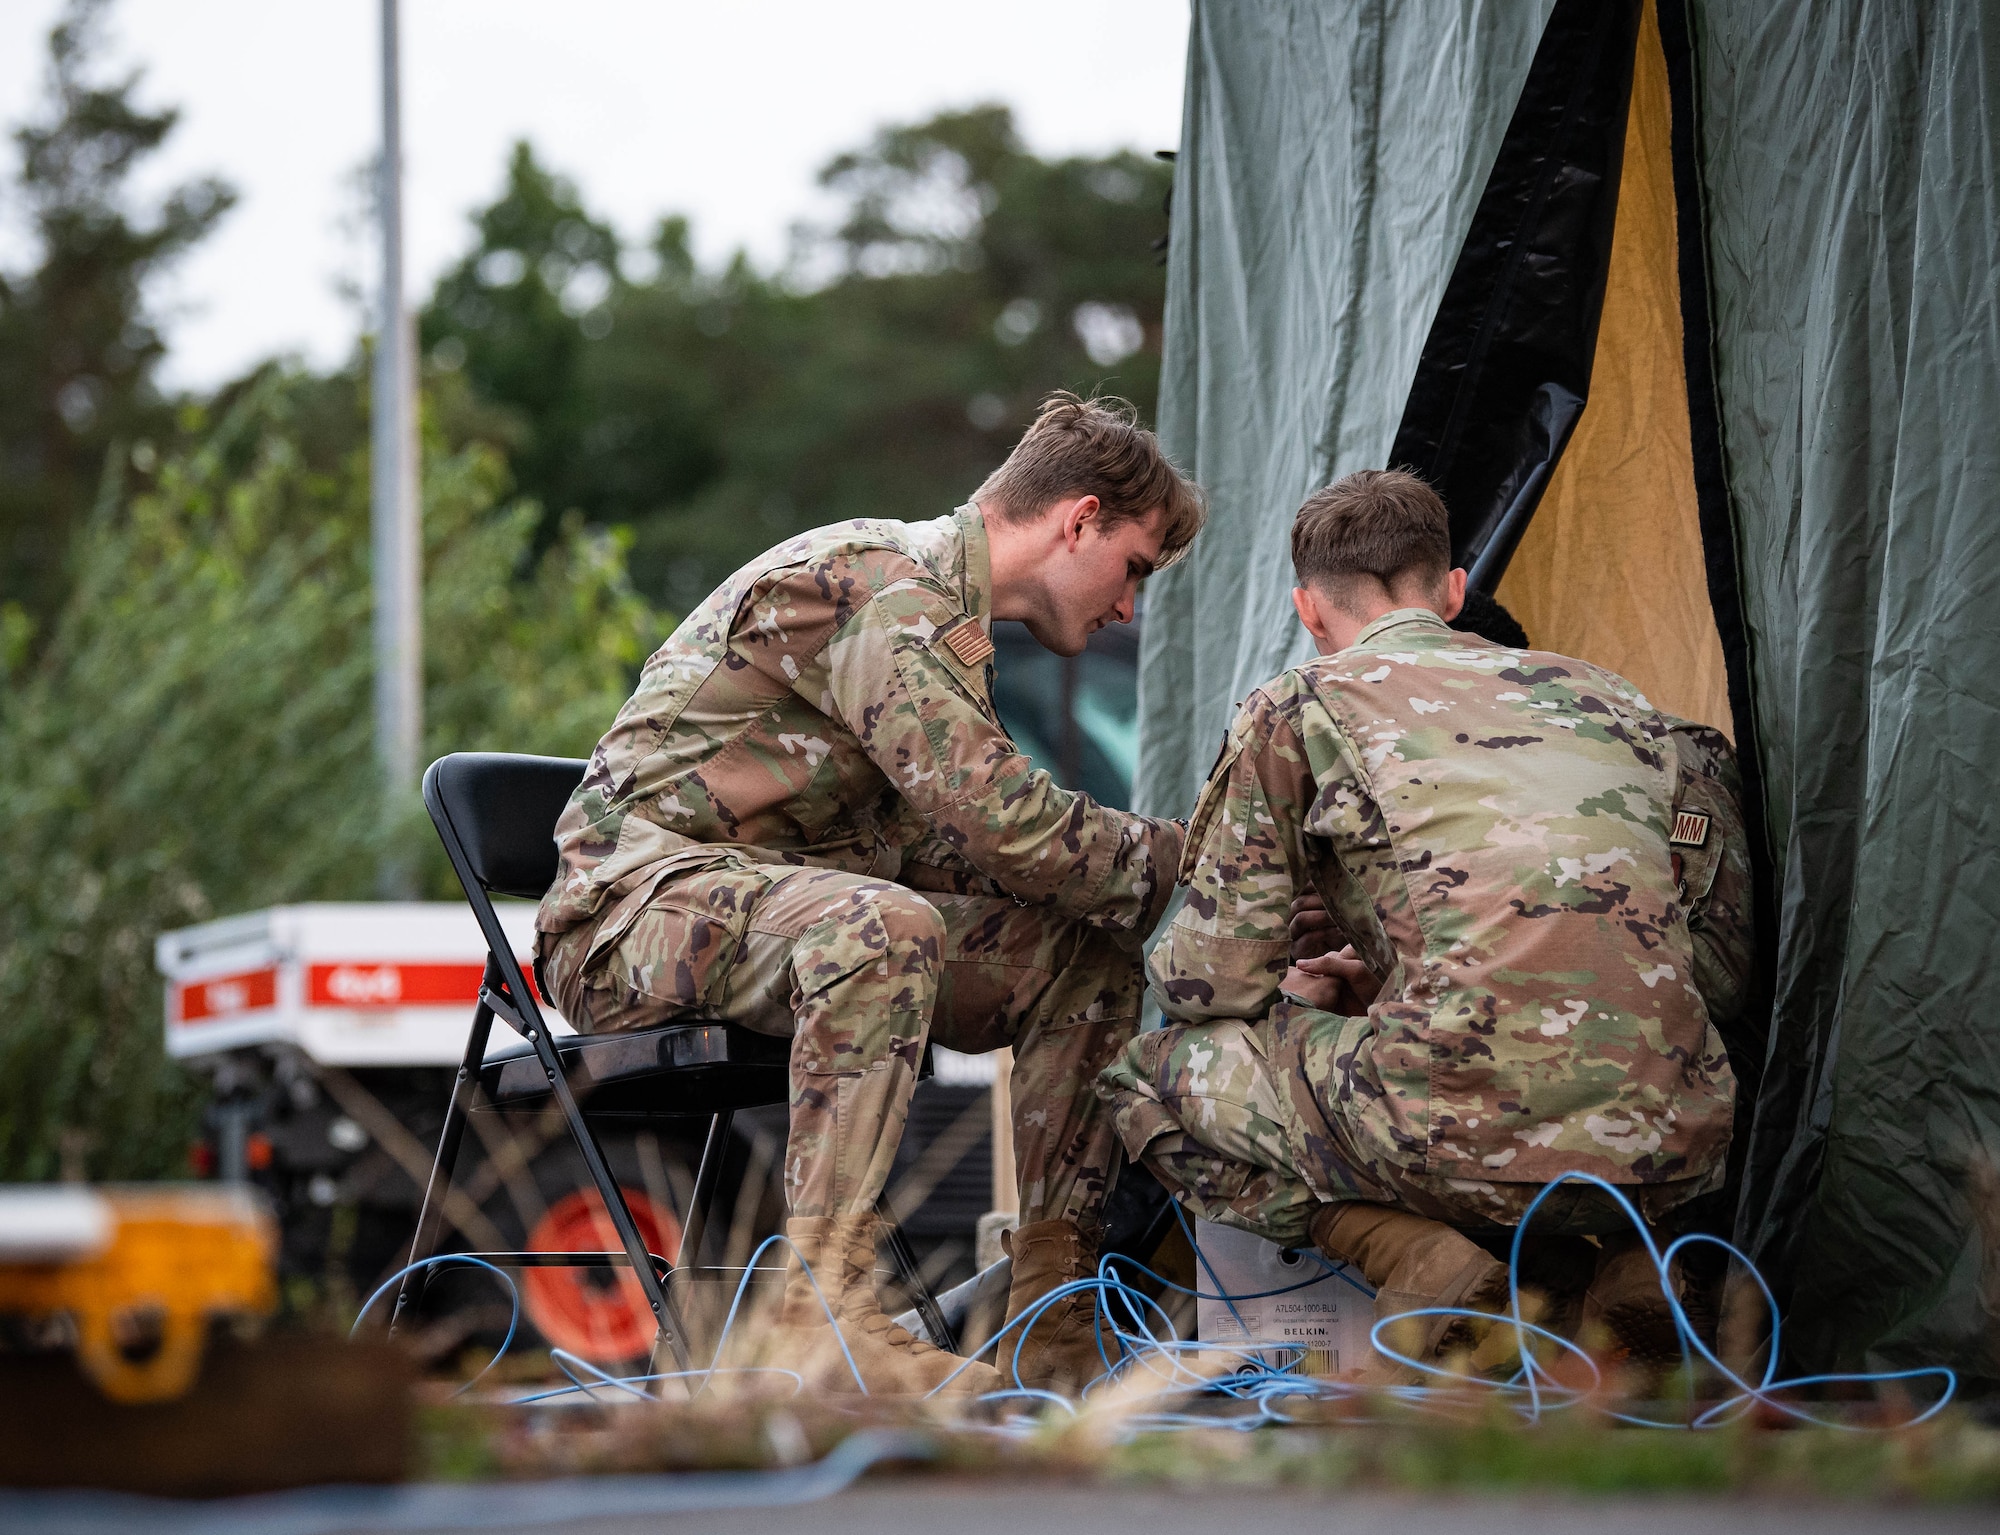 Airmen assigned to the 1st Combat Communications Squadron set up internet access for participants of Operation EASY MAC, an Agile Combat Employment exercise at Ramstein Air Base, Germany, Sept. 19, 2023. According to Air Force Doctrine, ACE is a proactive and reactive operational scheme of maneuver executed within threat timelines to increase survivability while generating combat power. (U.S. Air Force photo by Senior Airman Jared Lovett)